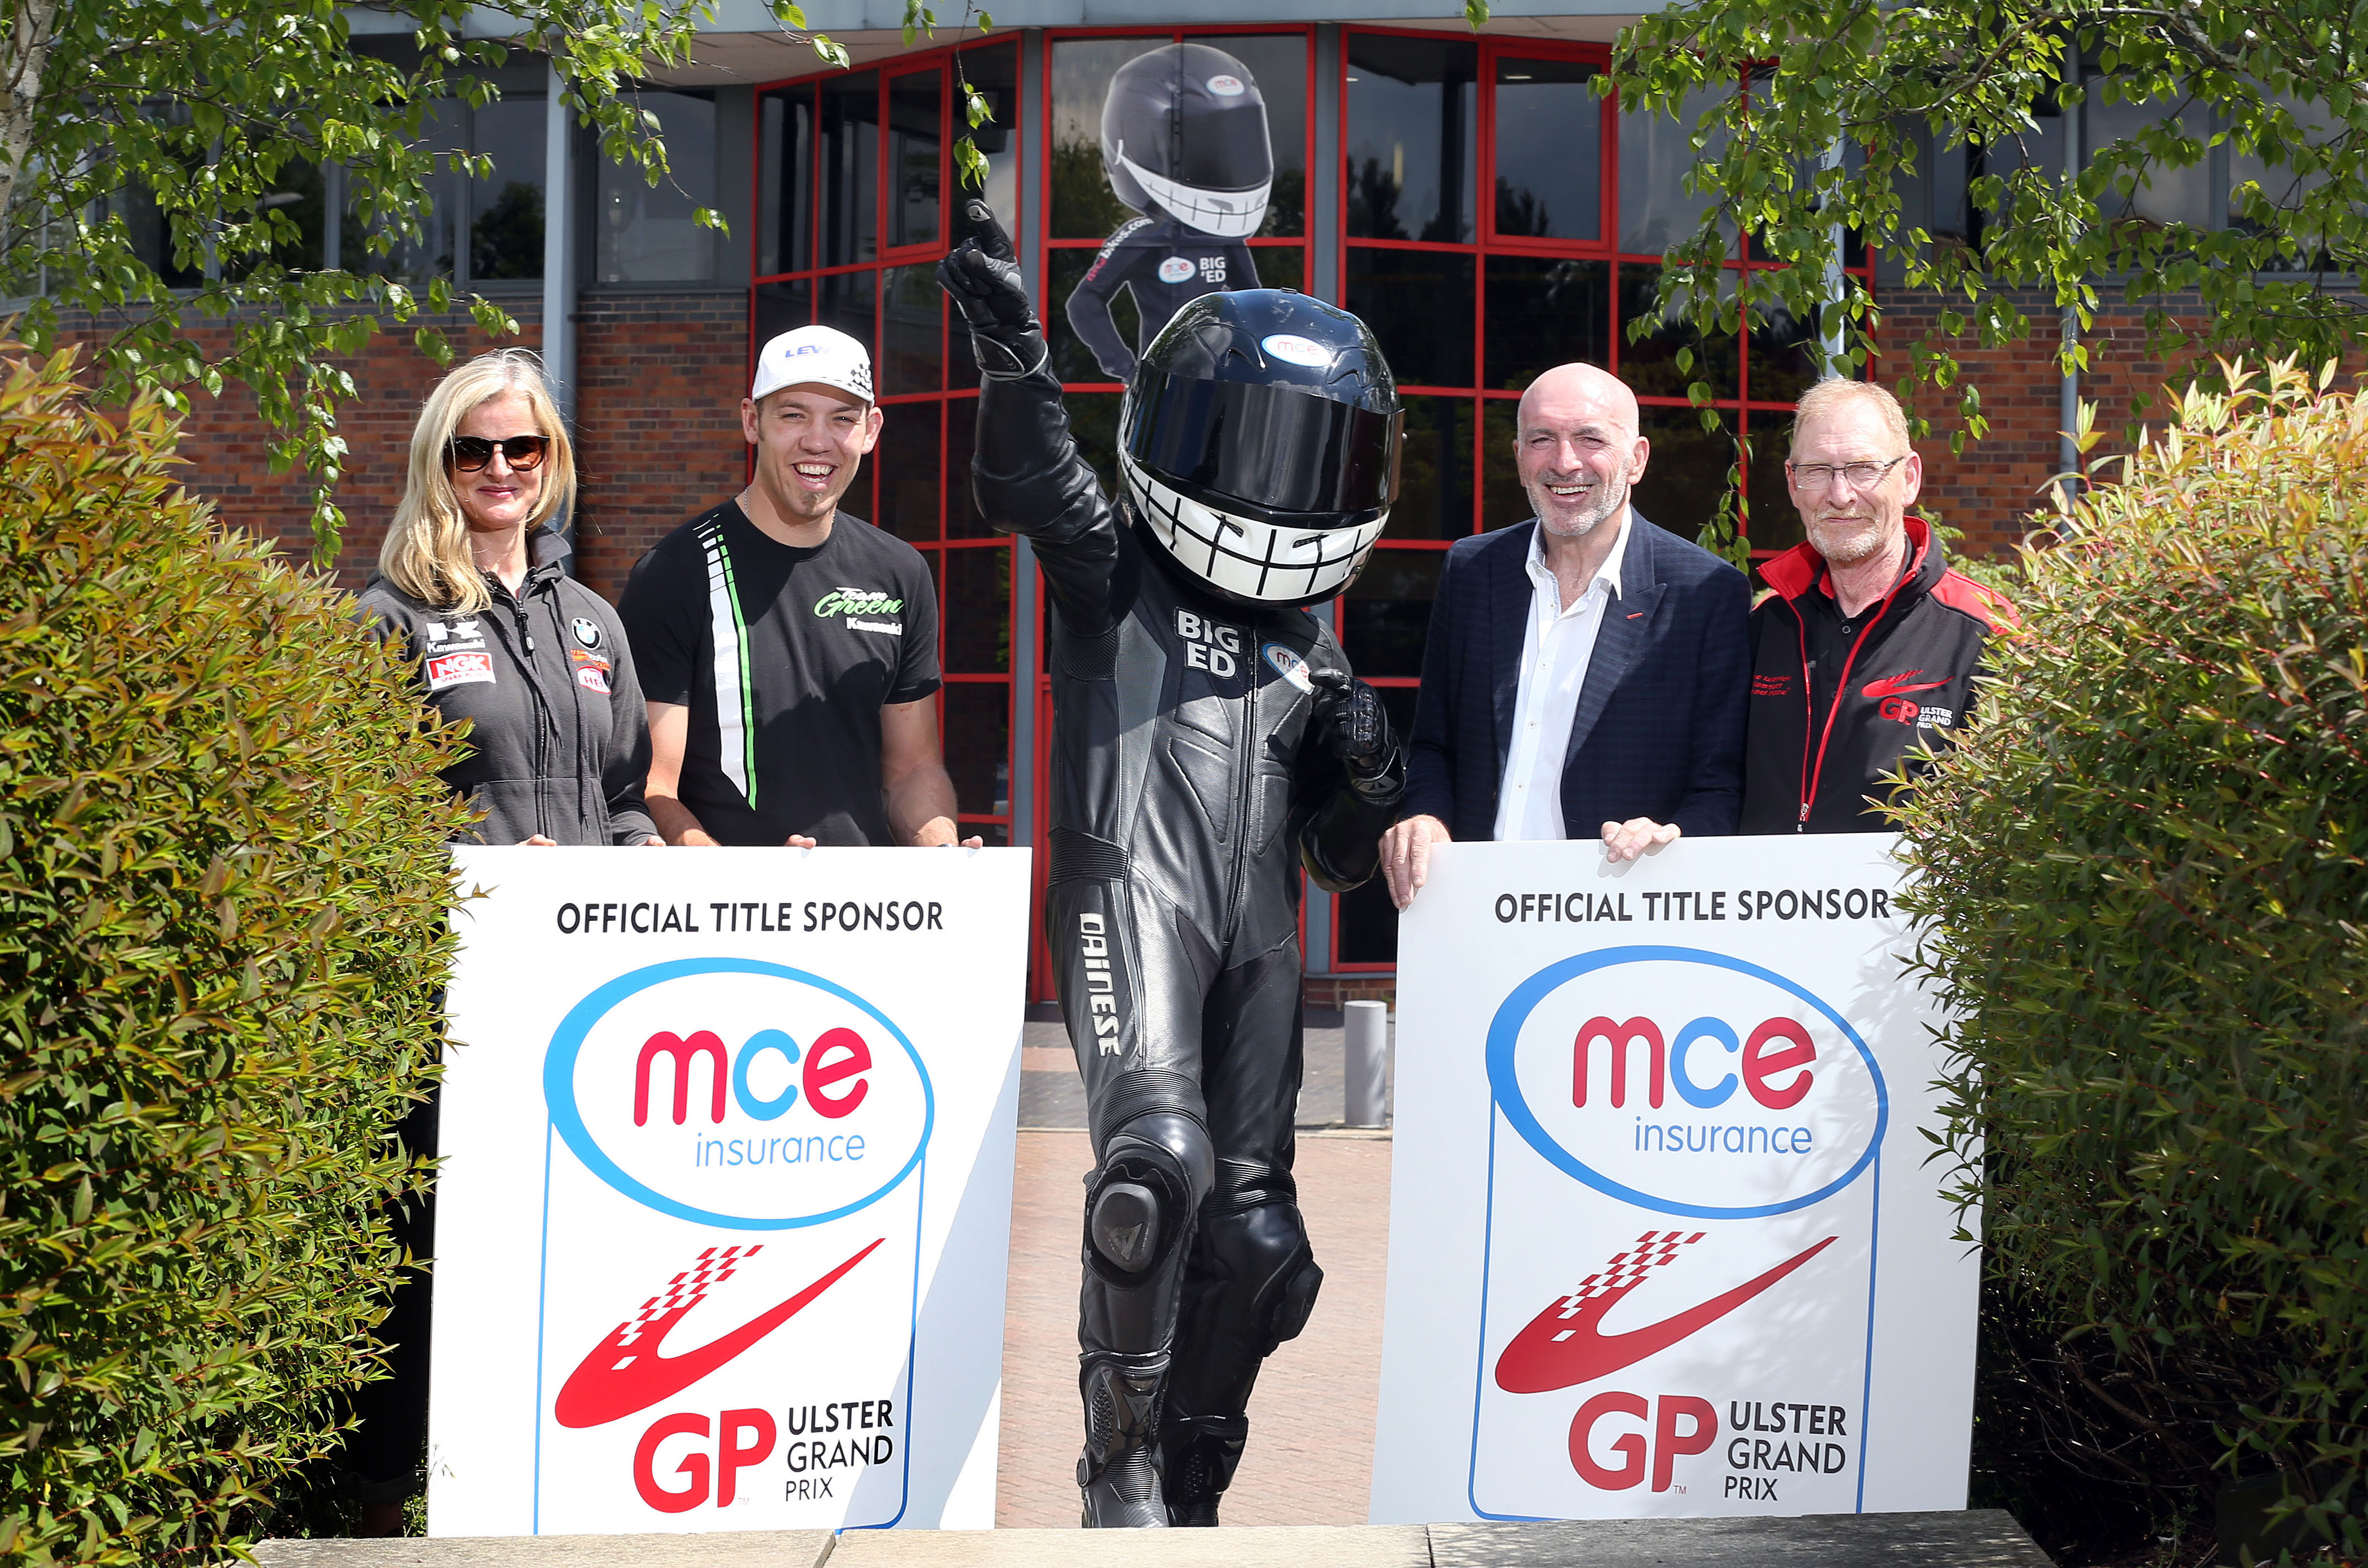 Ulster Grand Prix stakes its claim for success with new headline sponsor MCE Insurance to cover the World’s Fastest Road Race